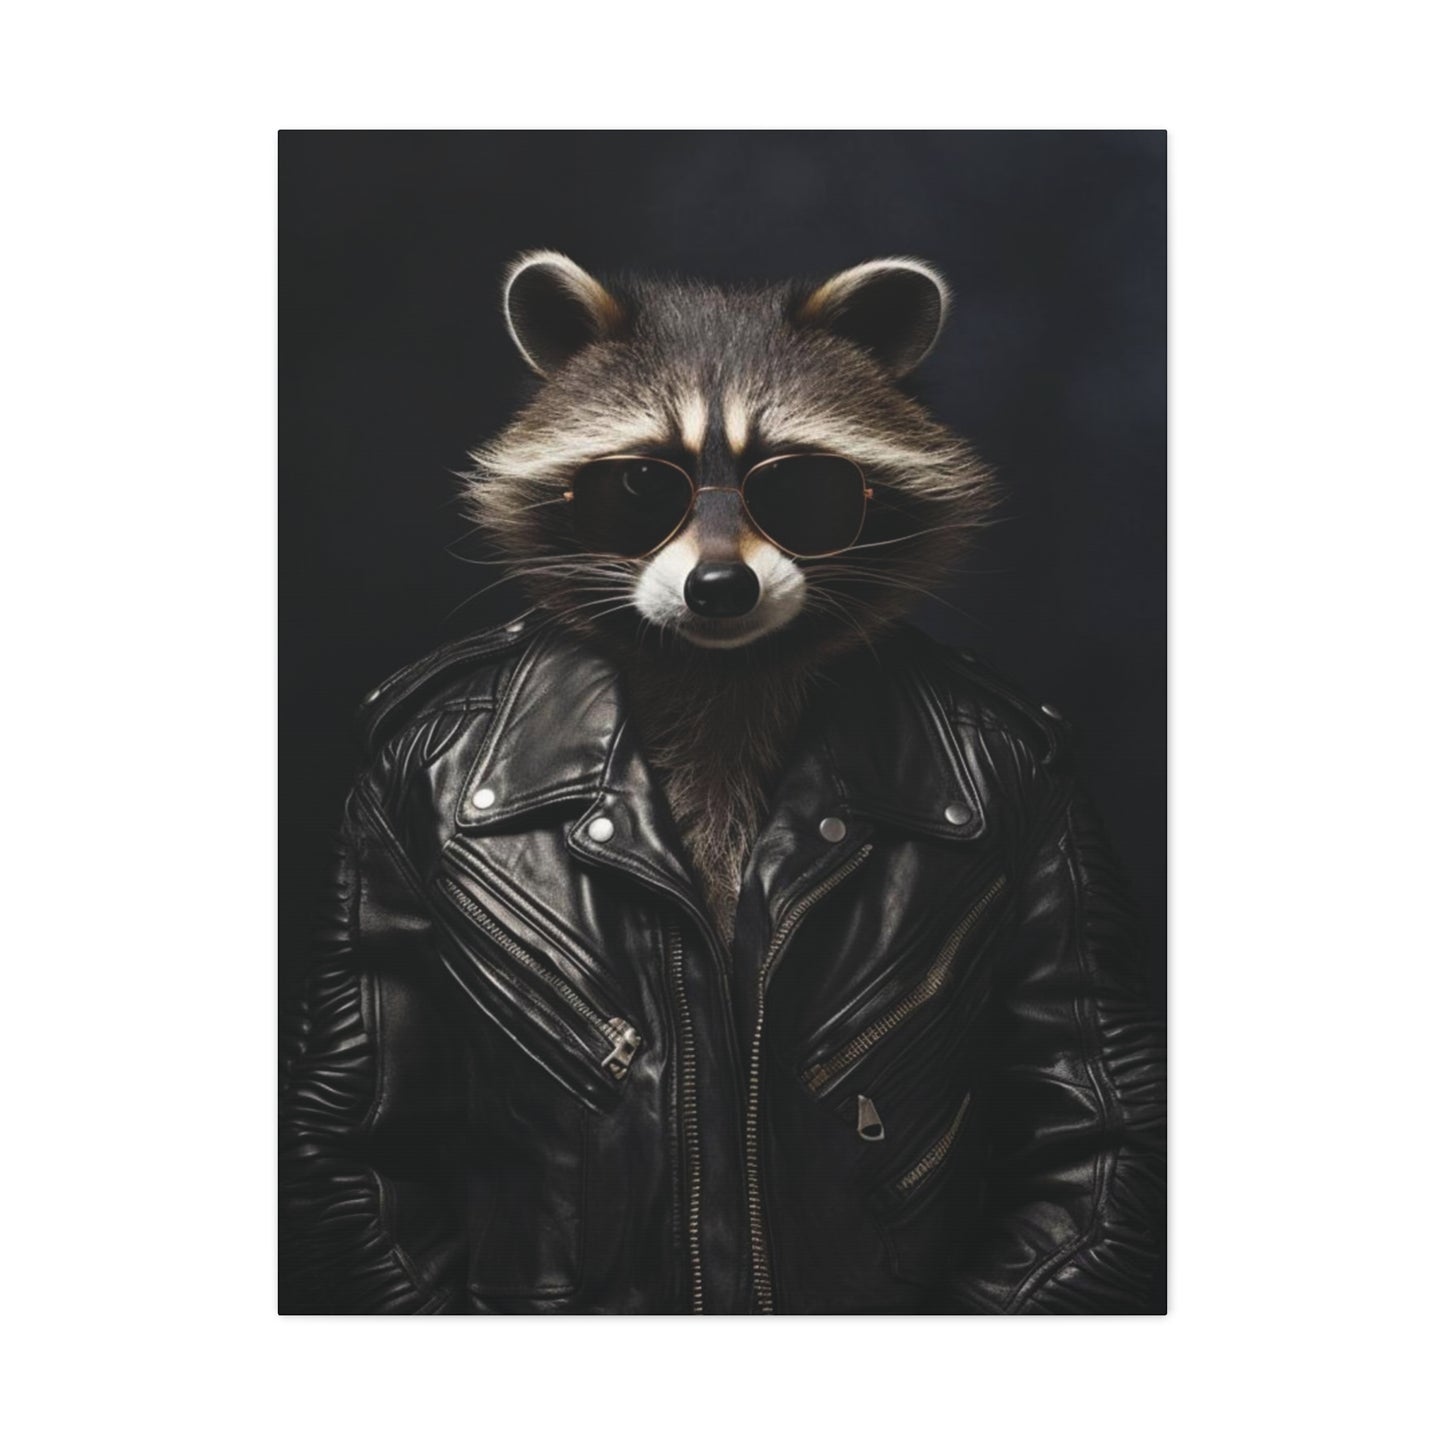 Raccon Leather | Canvas Gallery Wrap | Wall Art